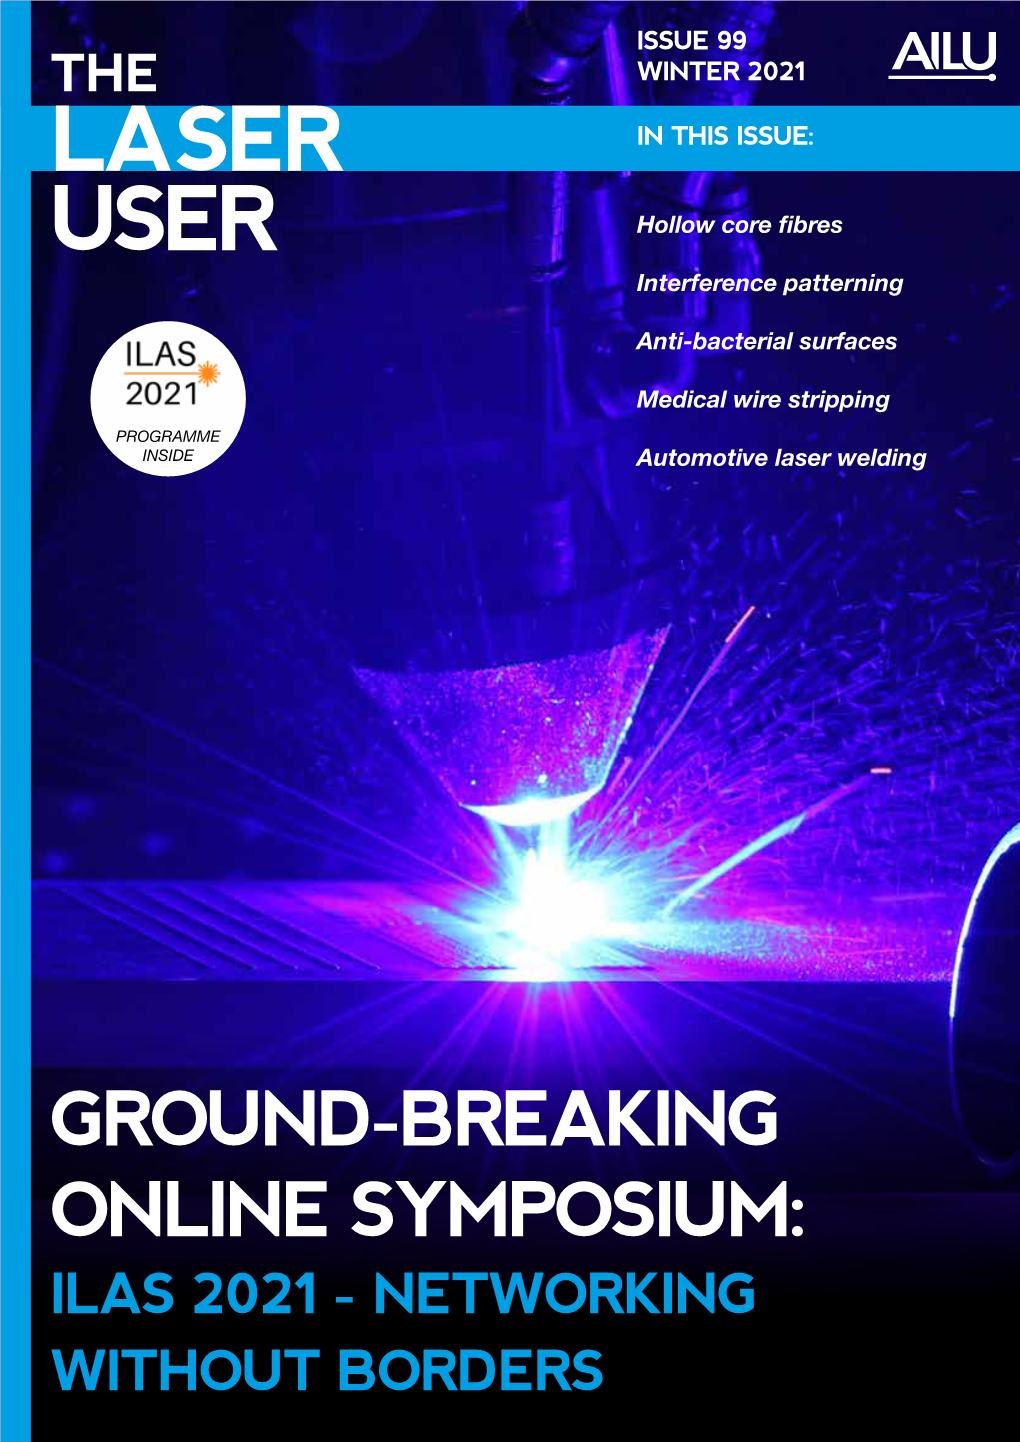 LASER USER ISSUE 99 ISSUE 99 WINTER 2021 the WINTER 2021 LASER in THIS ISSUE: USER Hollow Core Fibres Interference Patterning